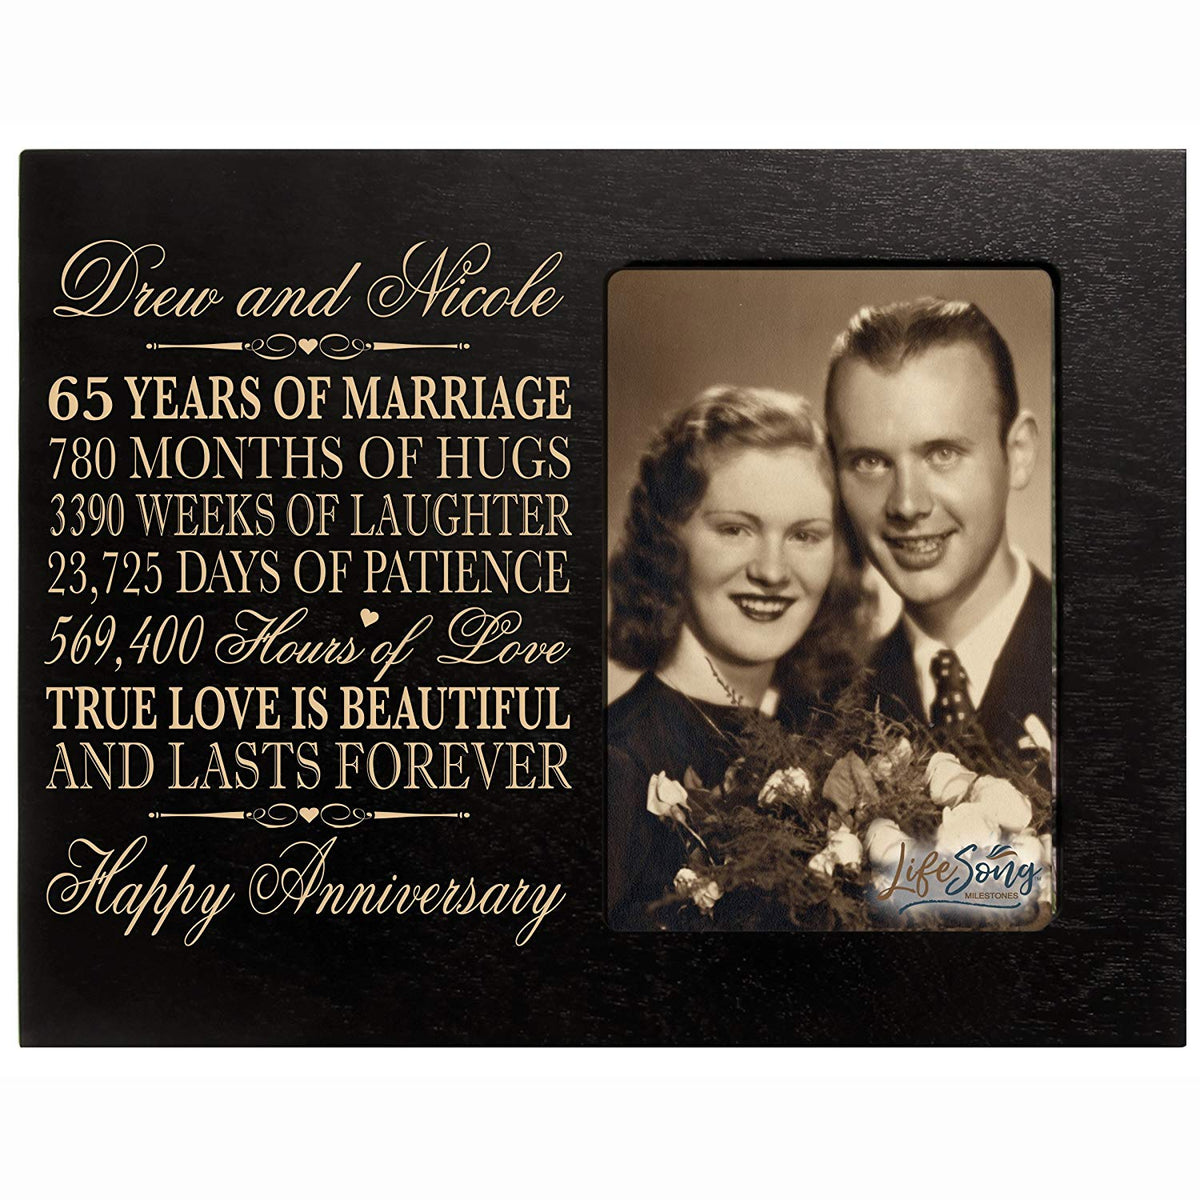 Personalized Unique 65th Wedding Anniversary Picture Frame for Couples - True Love Is Beautiful - LifeSong Milestones